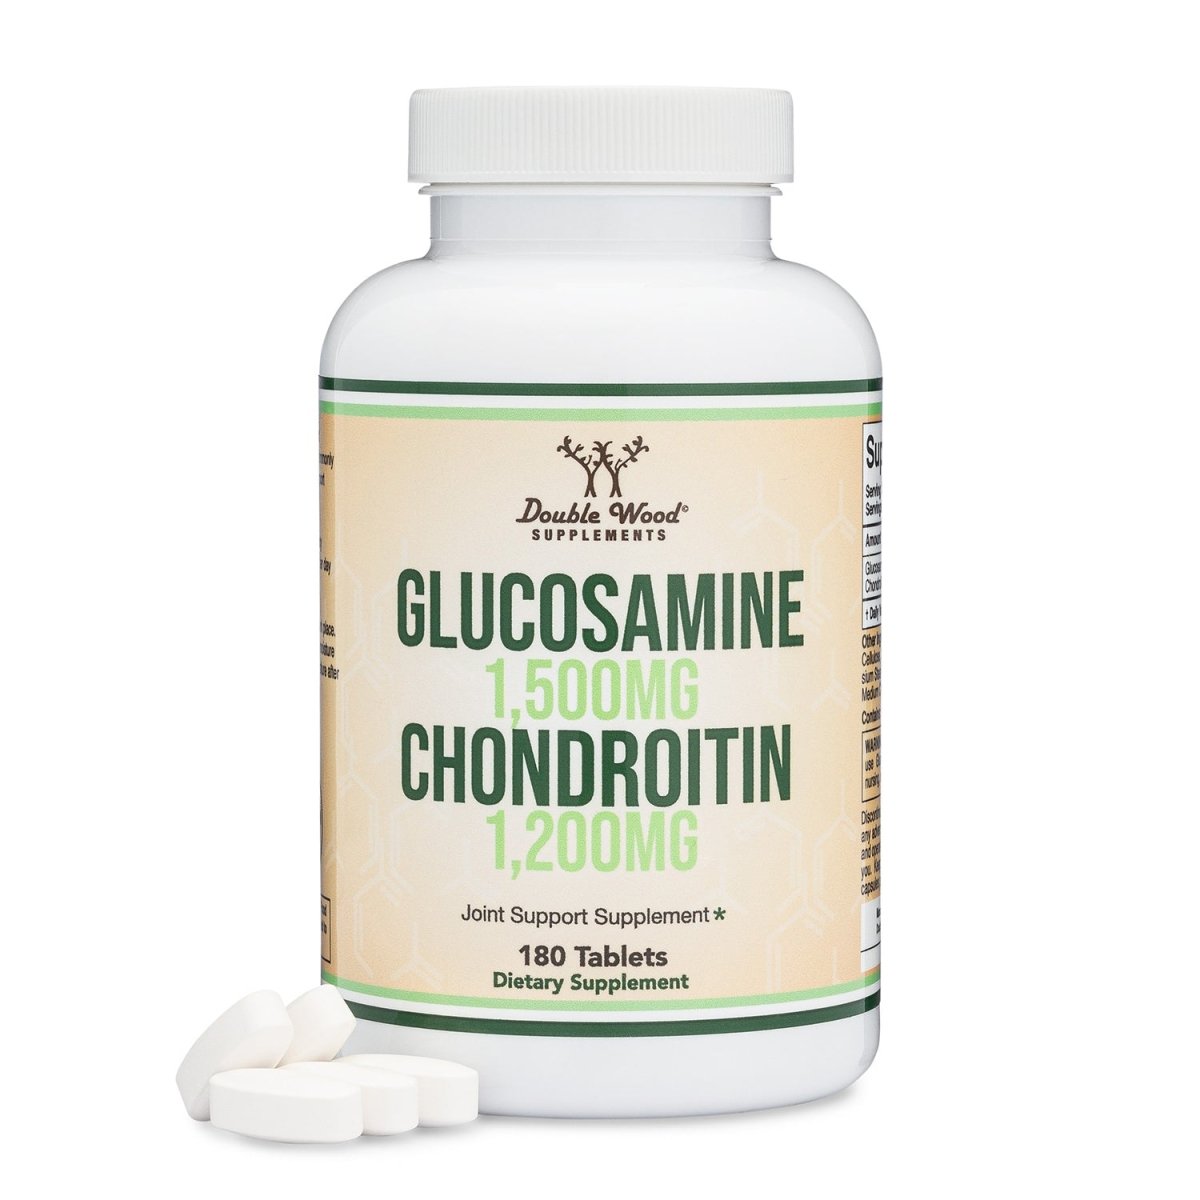 Glucosamine Chondroitin Double Pack - Double Wood Supplements